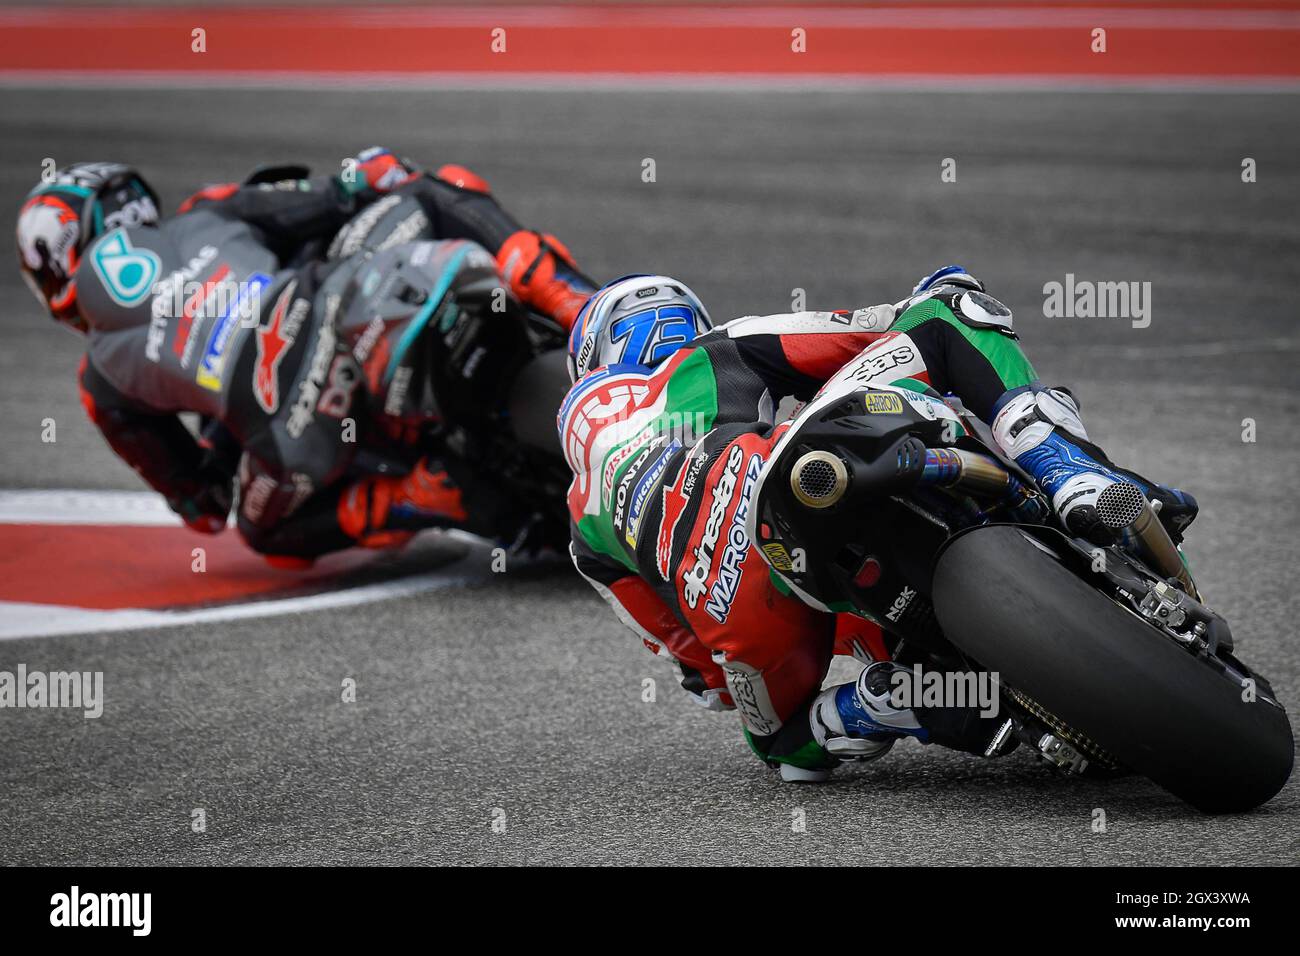 Austin, USA. 03rd Oct, 2021. Races at MotoGP Red Bull Grand Prix of the  Americas at Circuit of the Americas Blvd, Austin, Texas, October 3, 2021 In  picture: Spain Alex Márquez Carreras